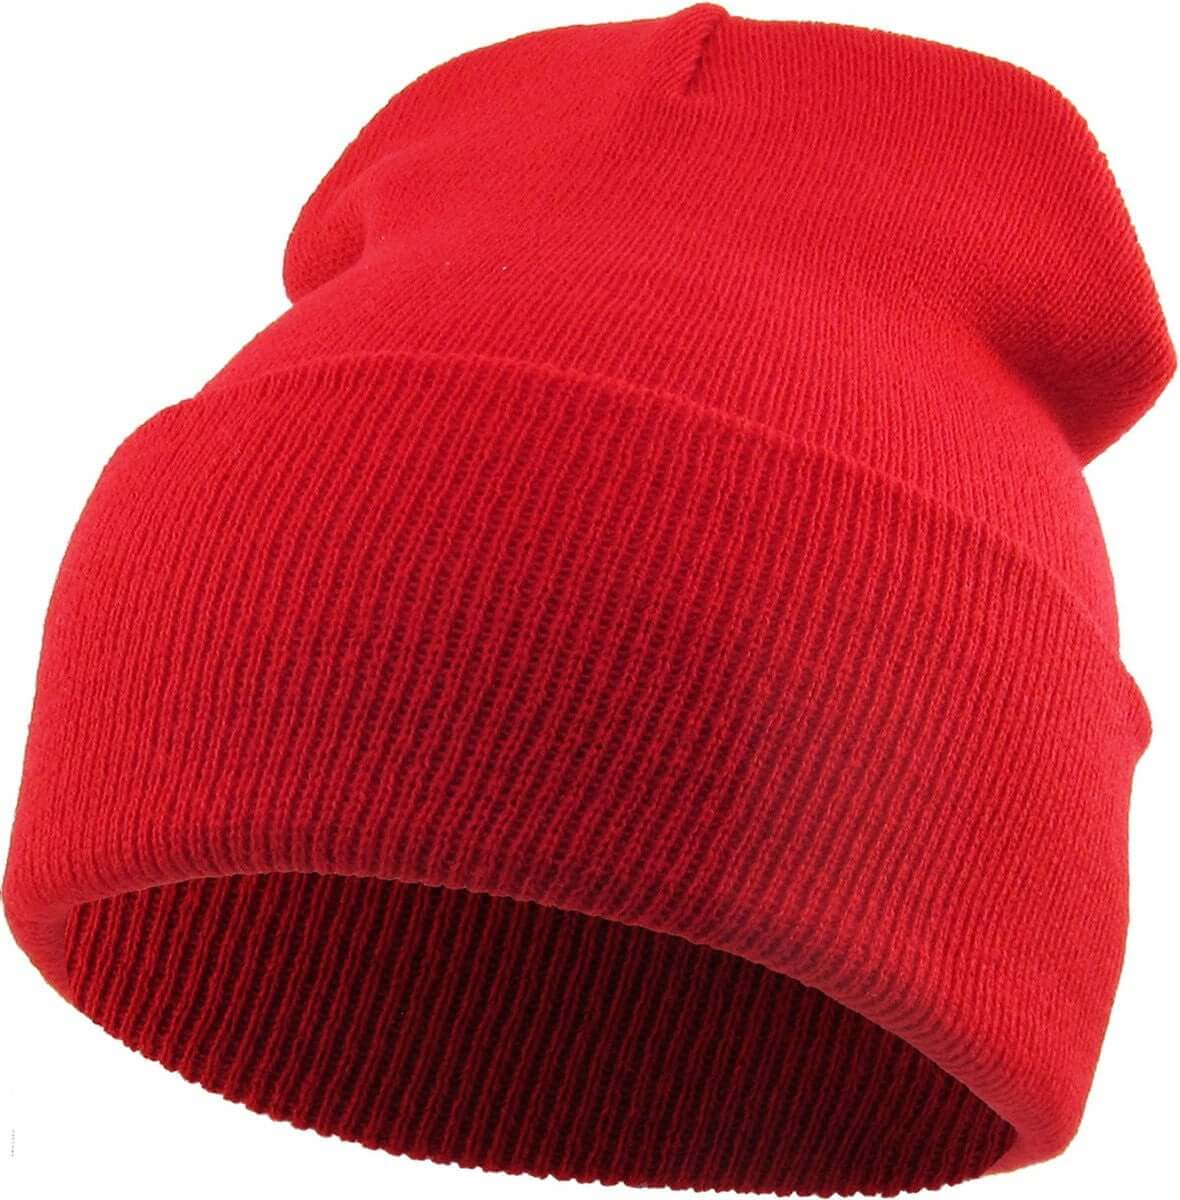 The All-American Beanie Image